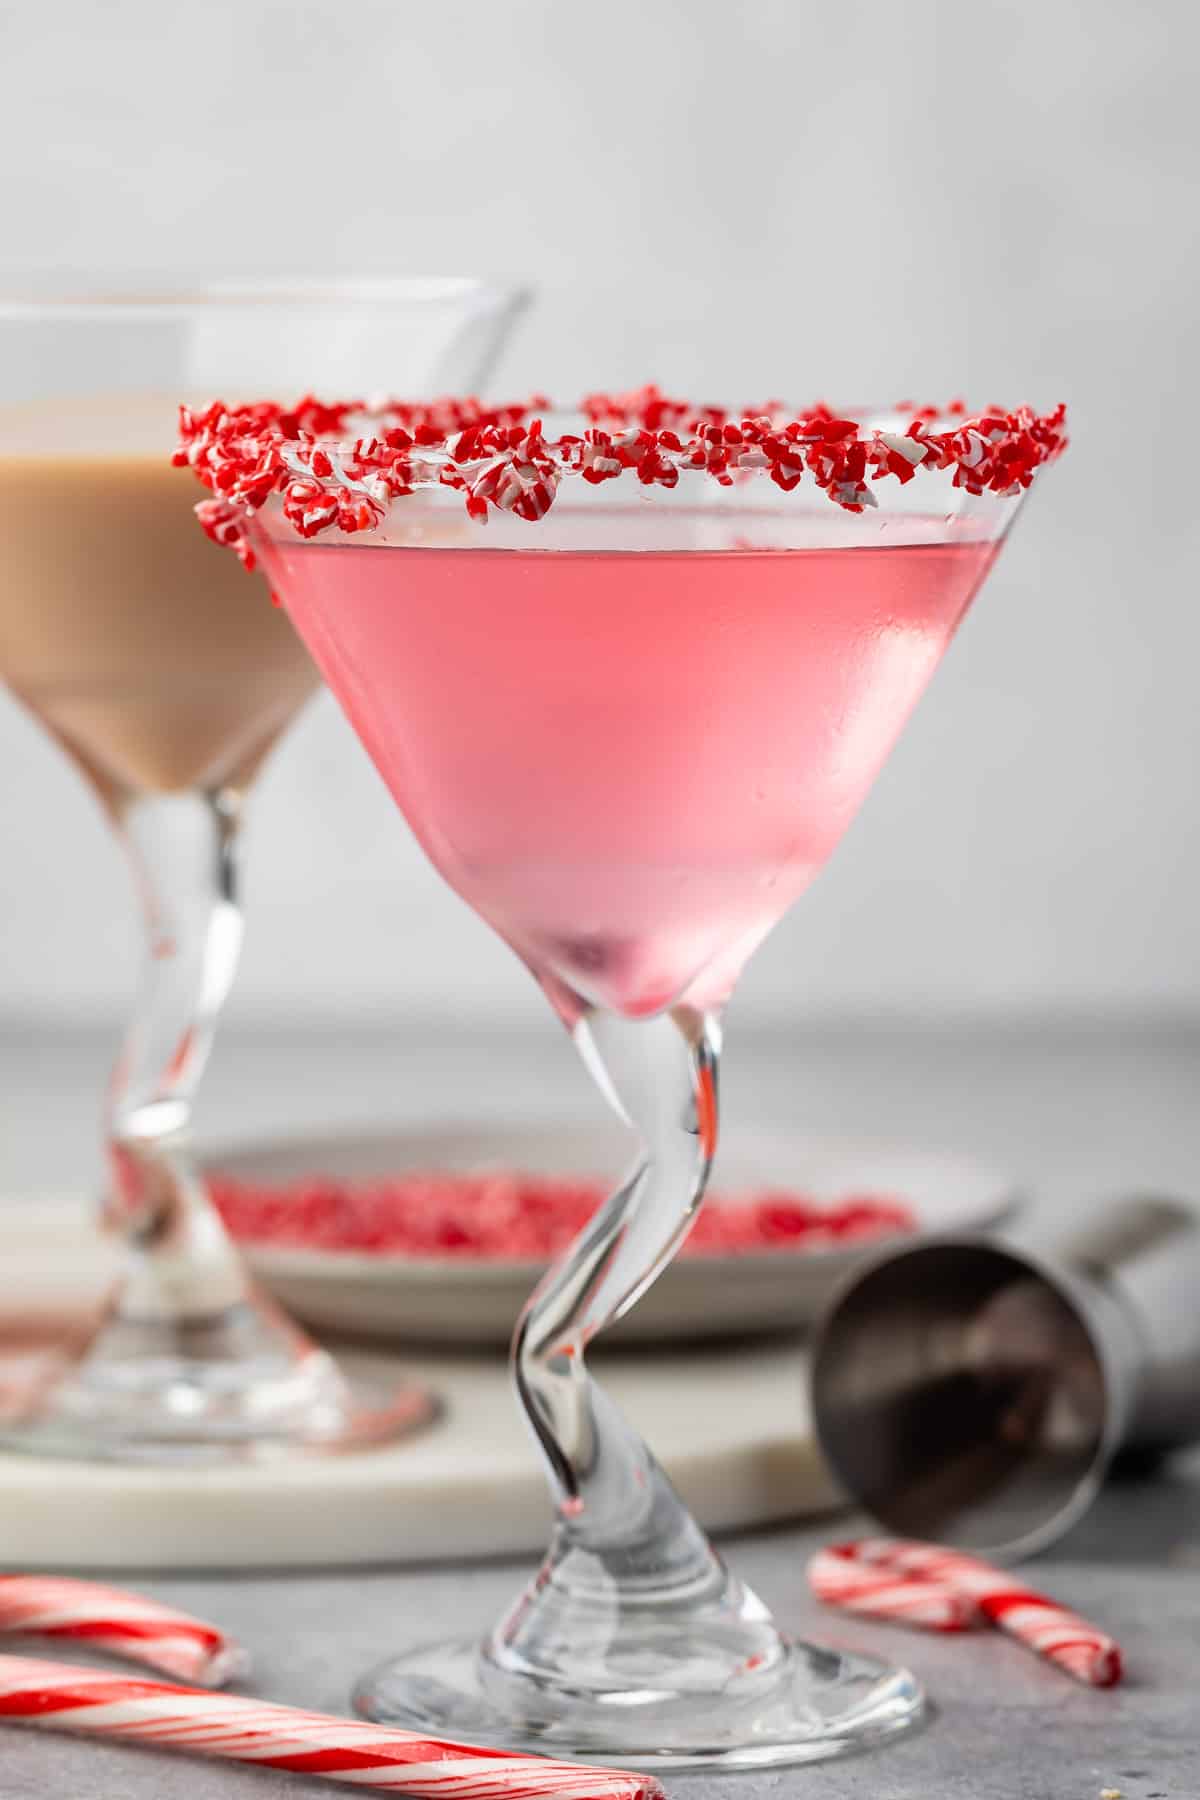 candy cane martini in a martini glass with crushed candy canes on the rim